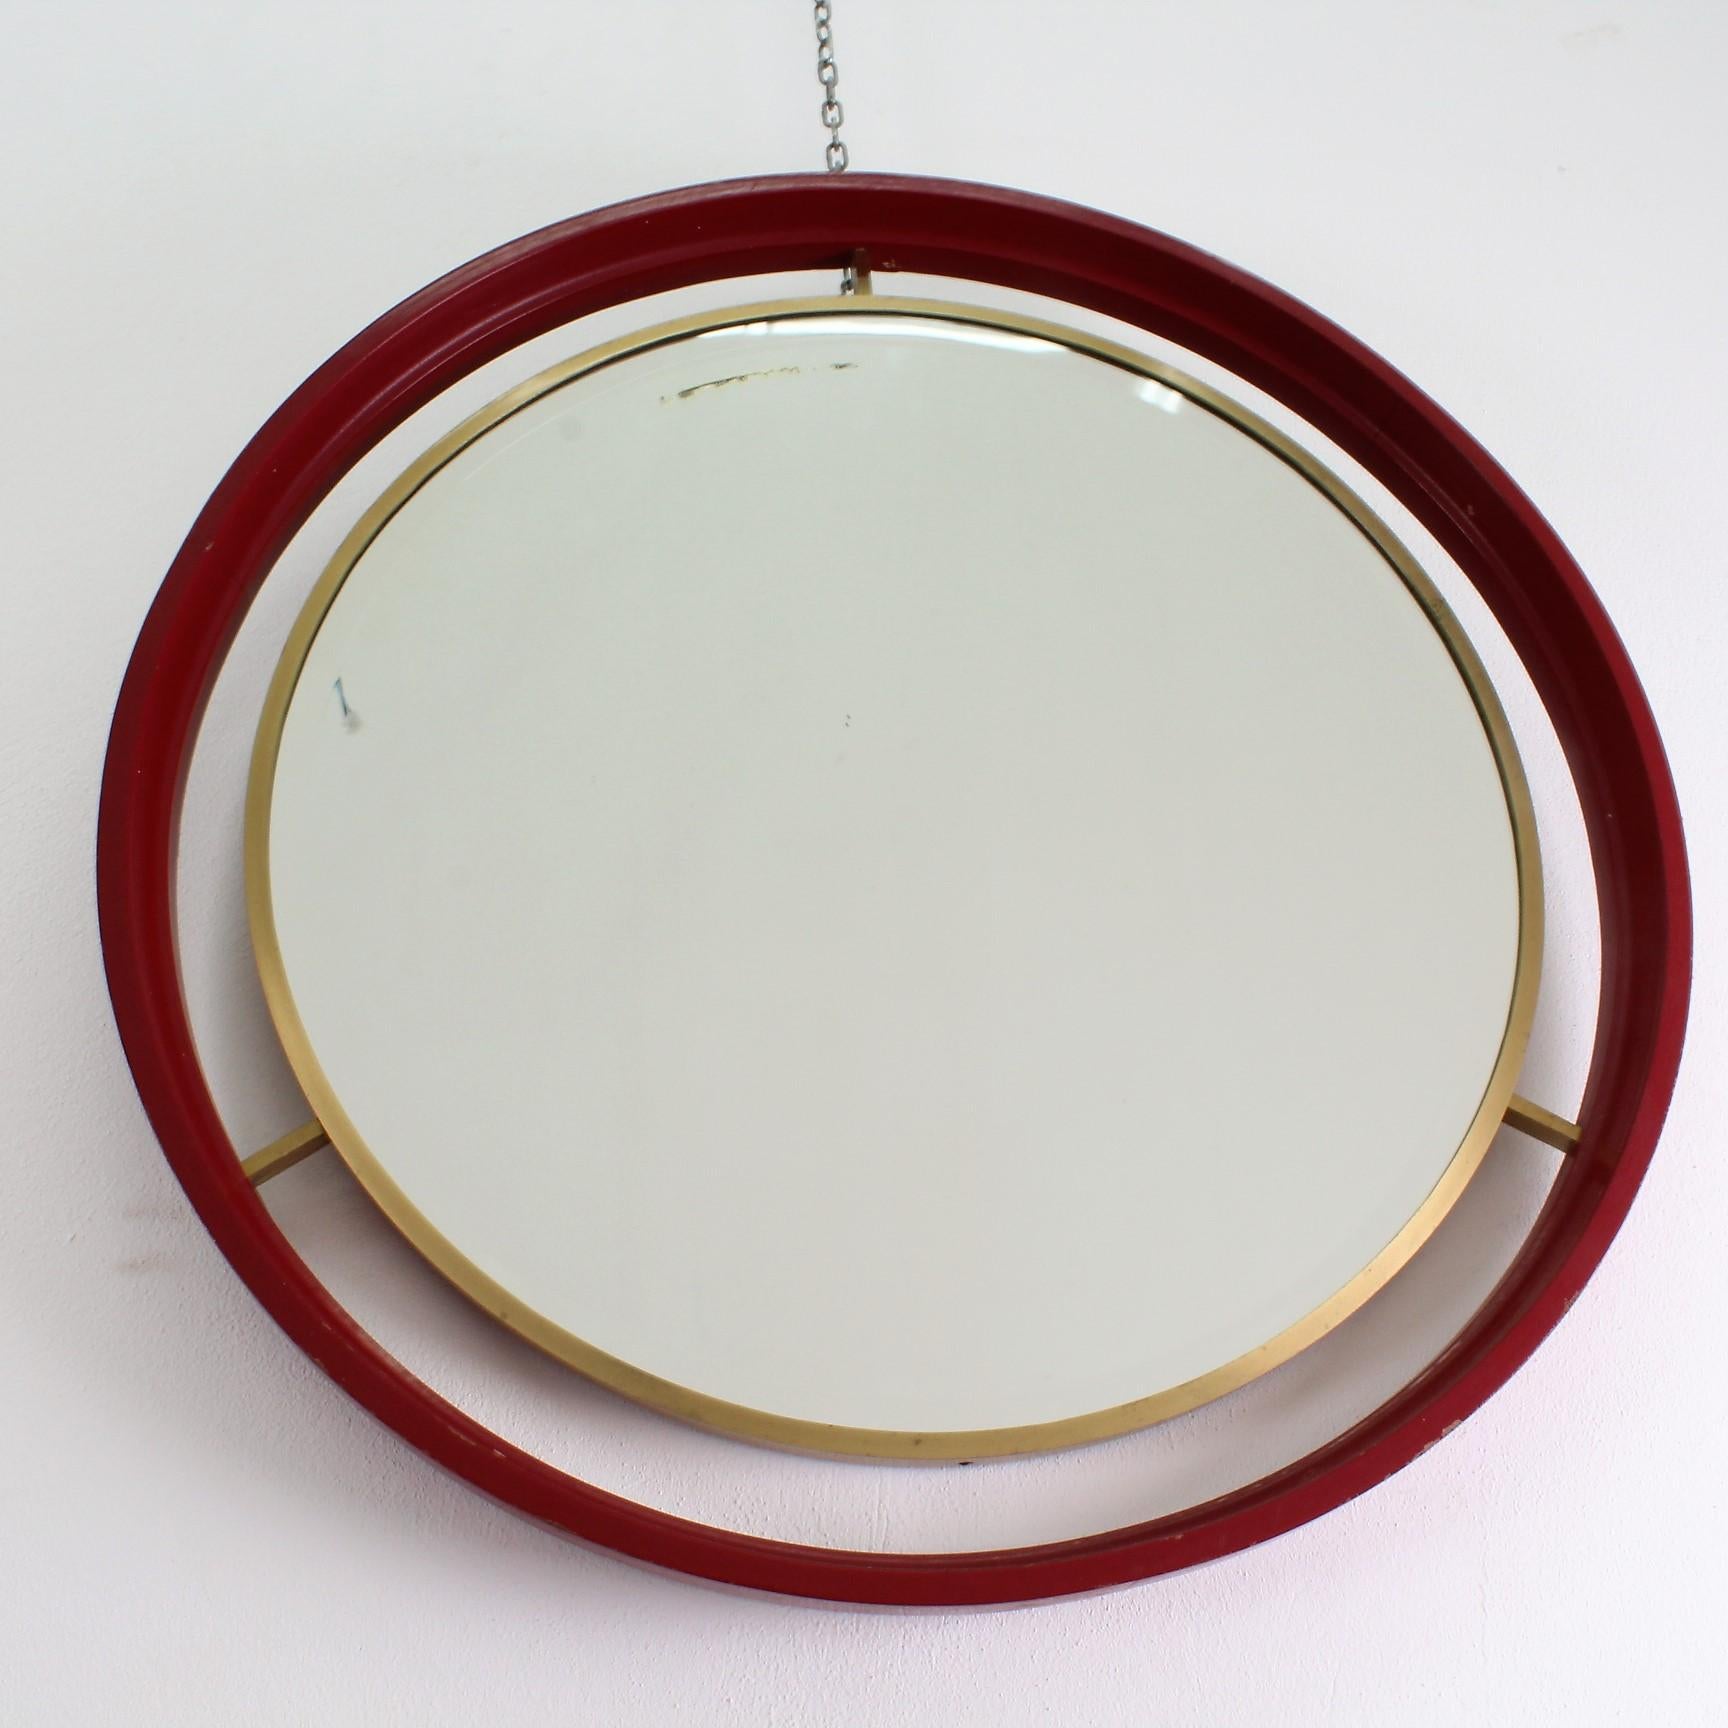 Midcentury circle red wood brass Italian vintage mirror, 1960.
Wear consistent with age and use.